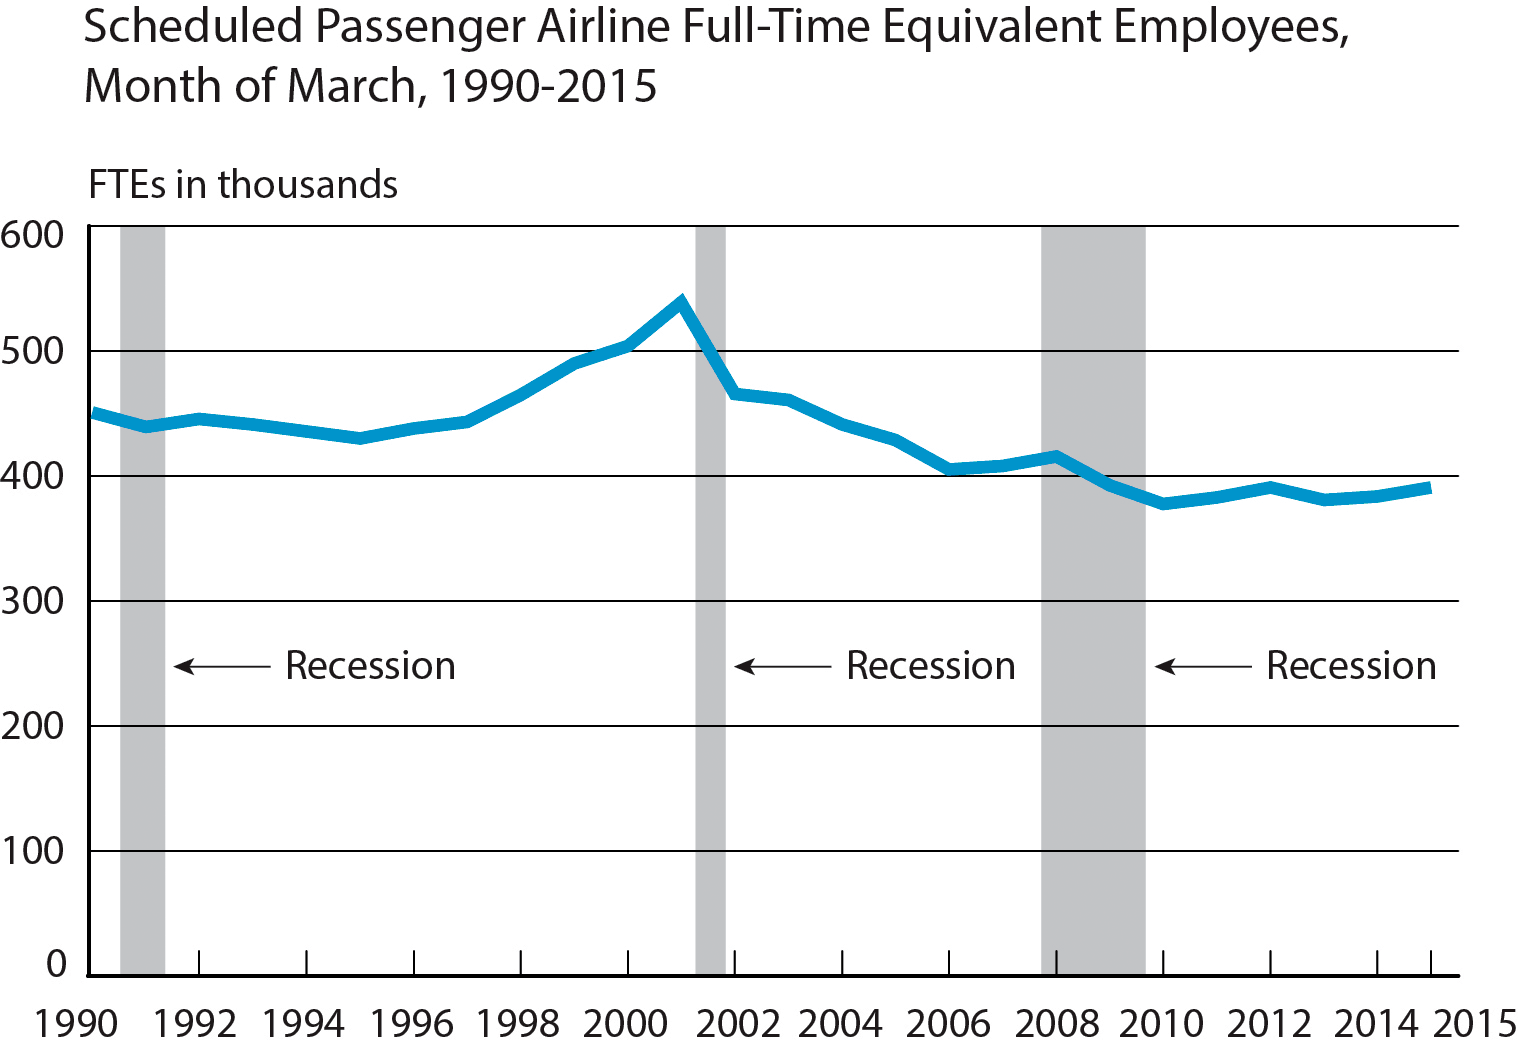 Scheduled Passenger Airline Full-Time Equivalent Employees, Month of March, 1990-2015